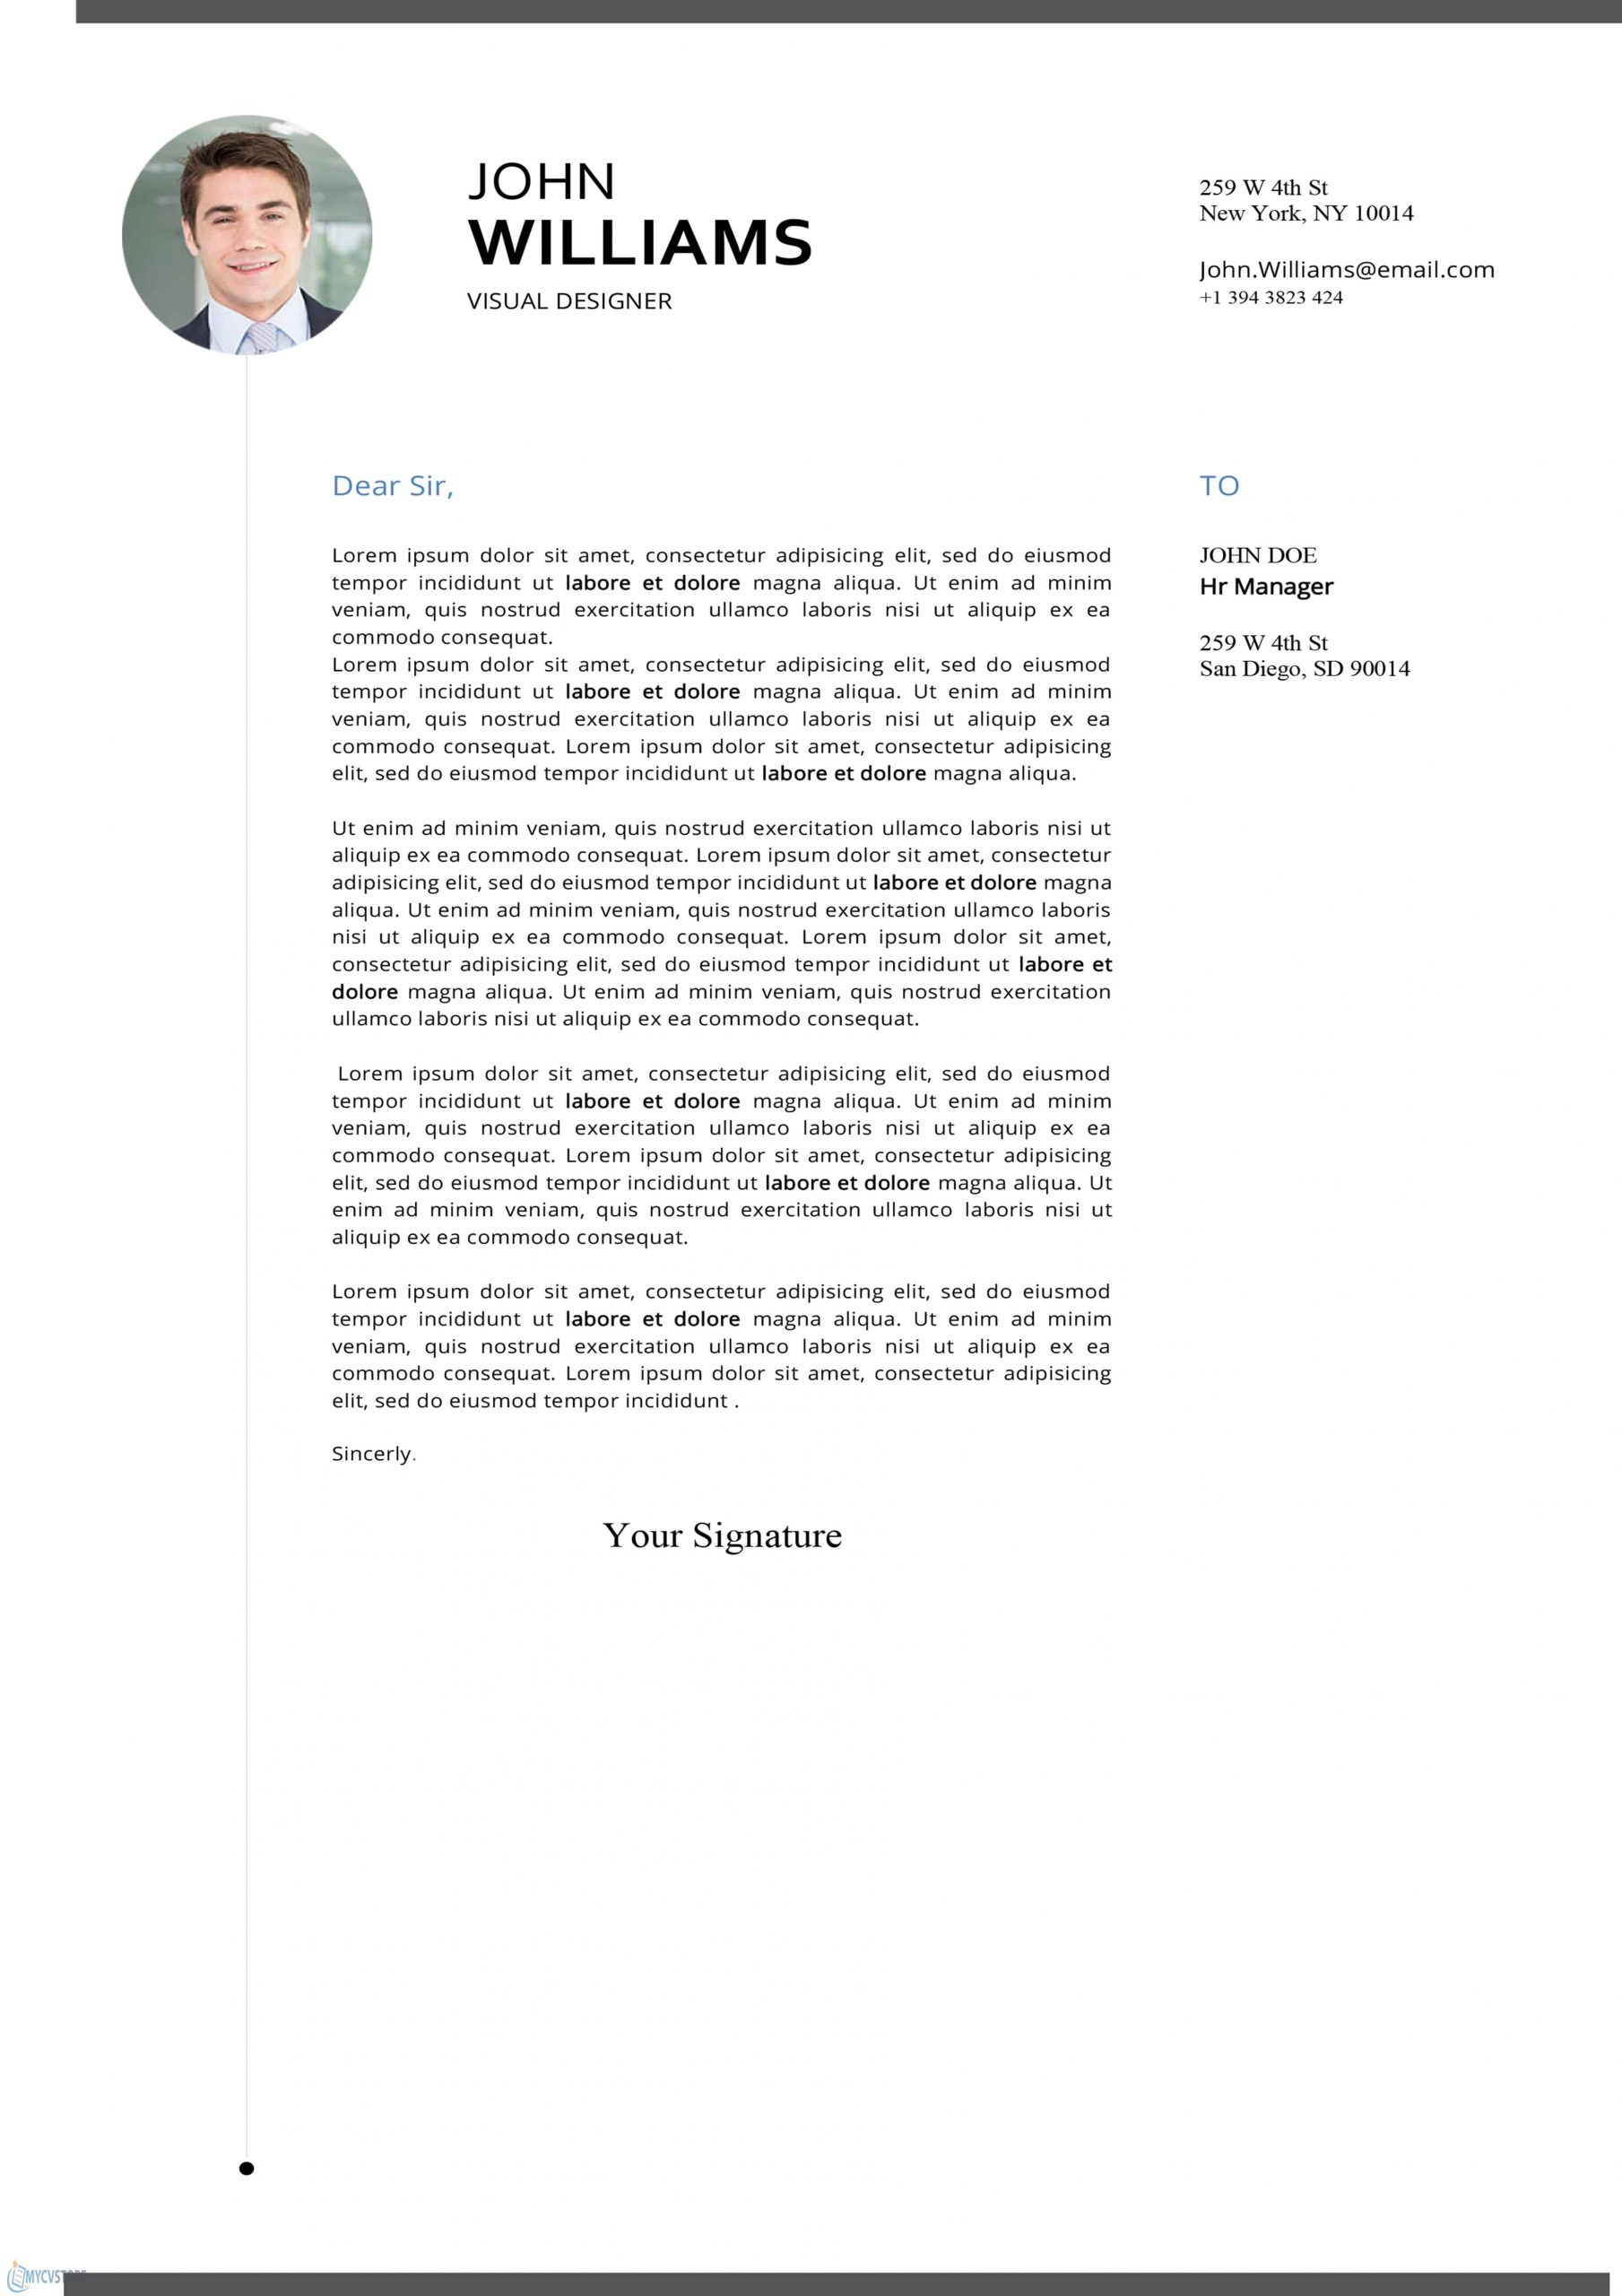 Original Cover Letter - Download MS Word Format Templates